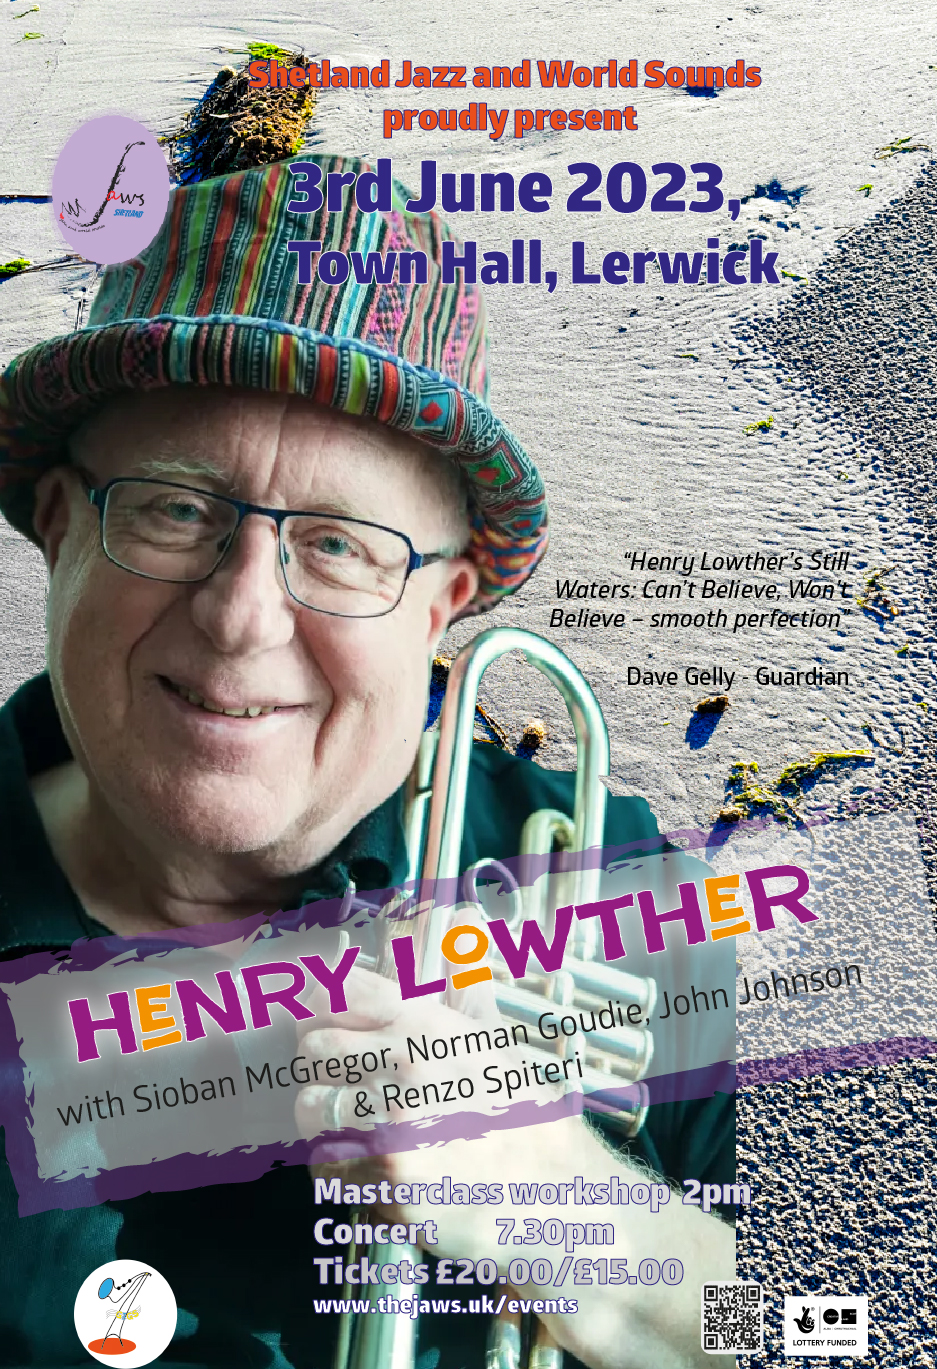 Henry Lowther